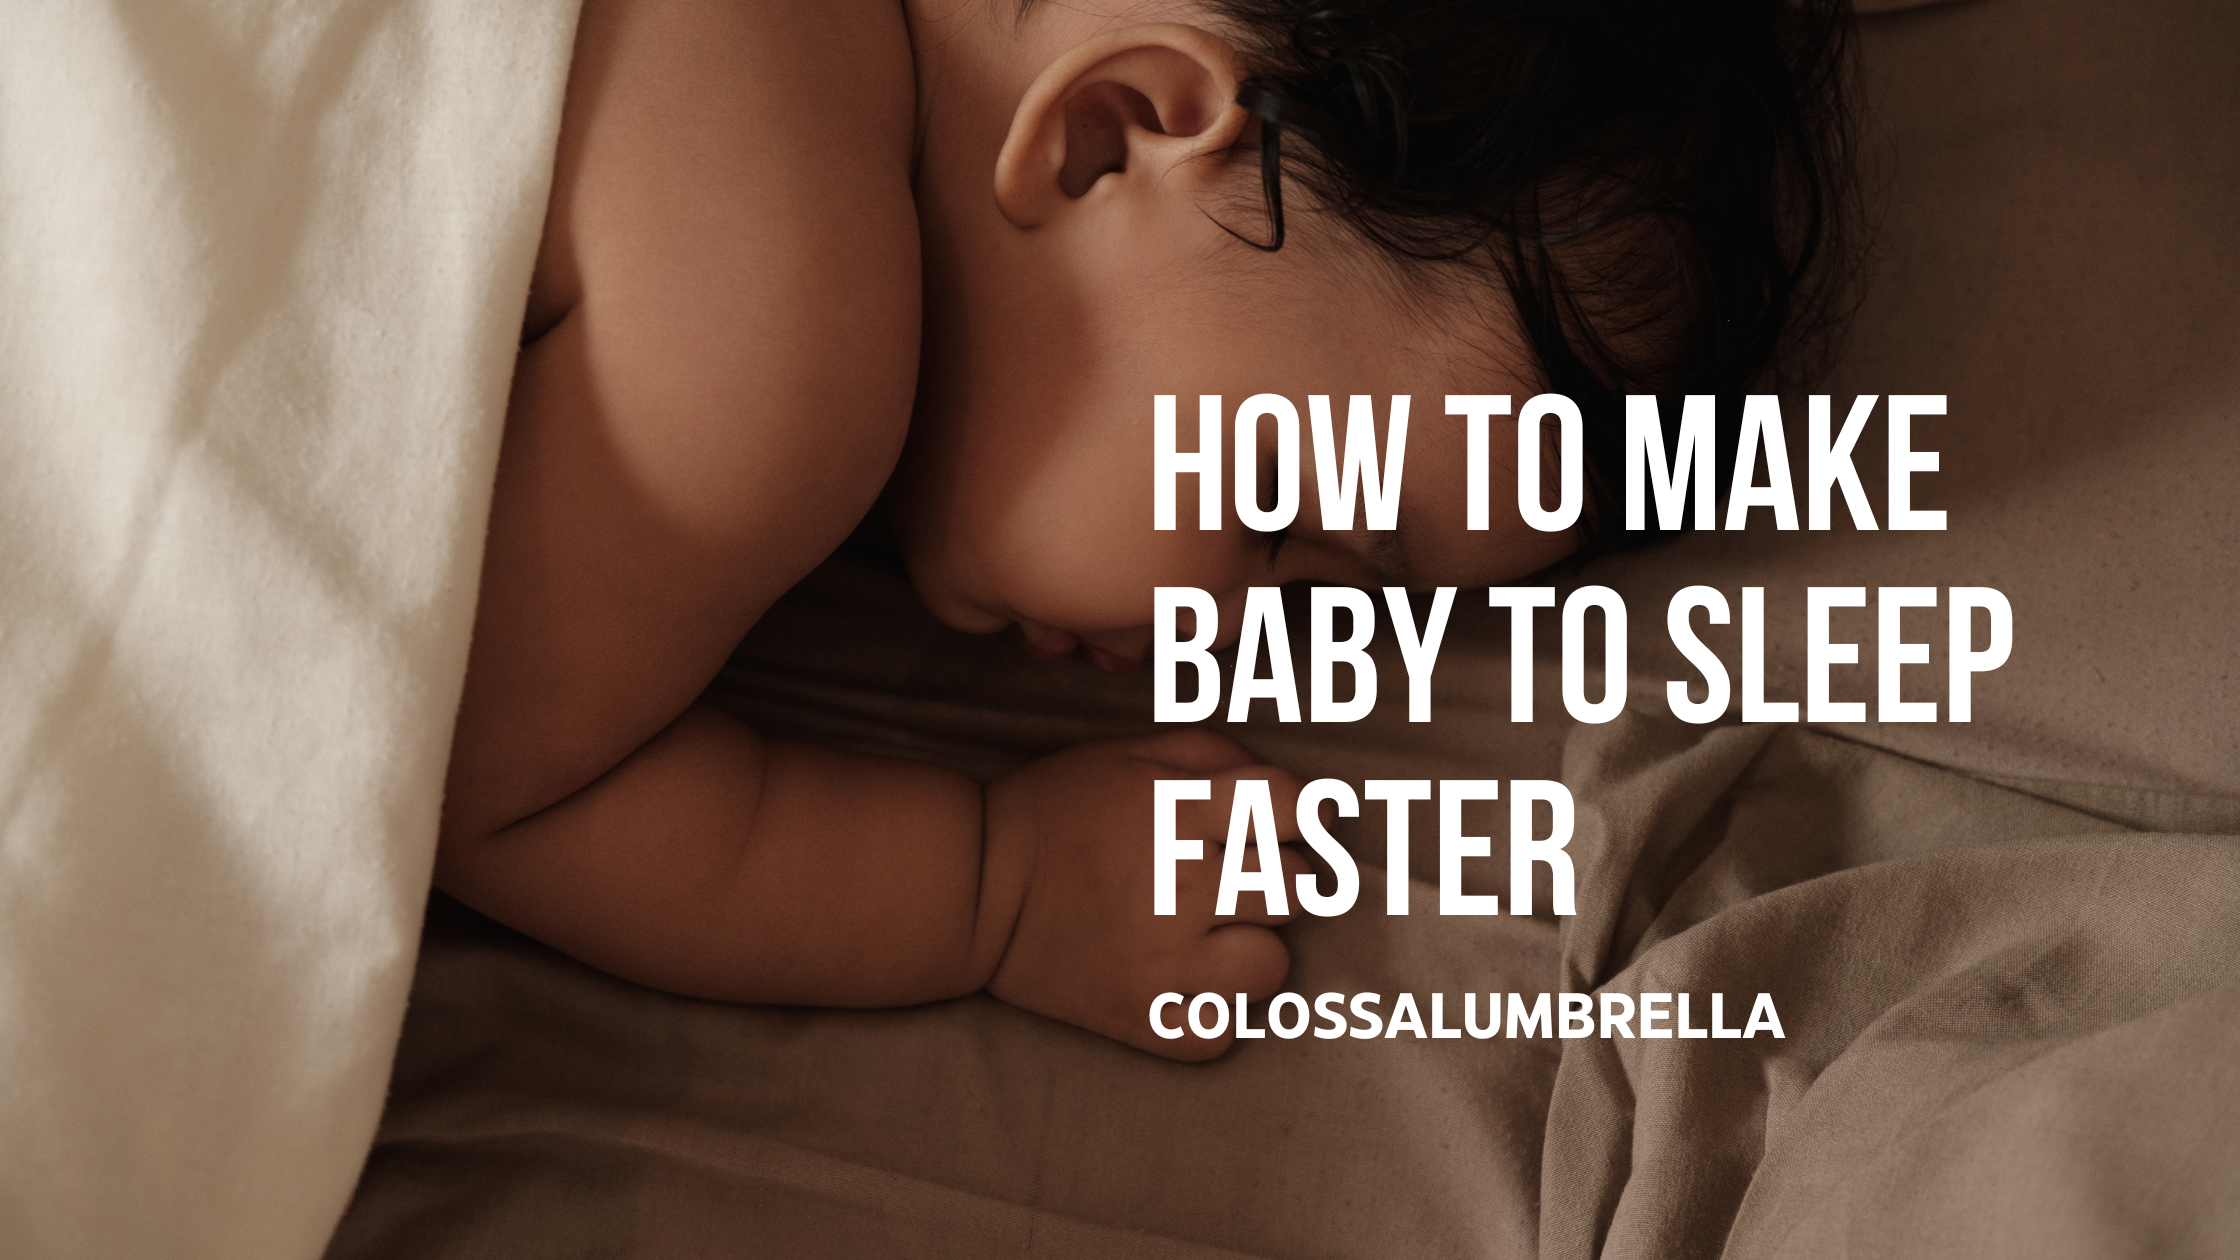 How to put a baby to sleep in 40 seconds – Baby sleep hack